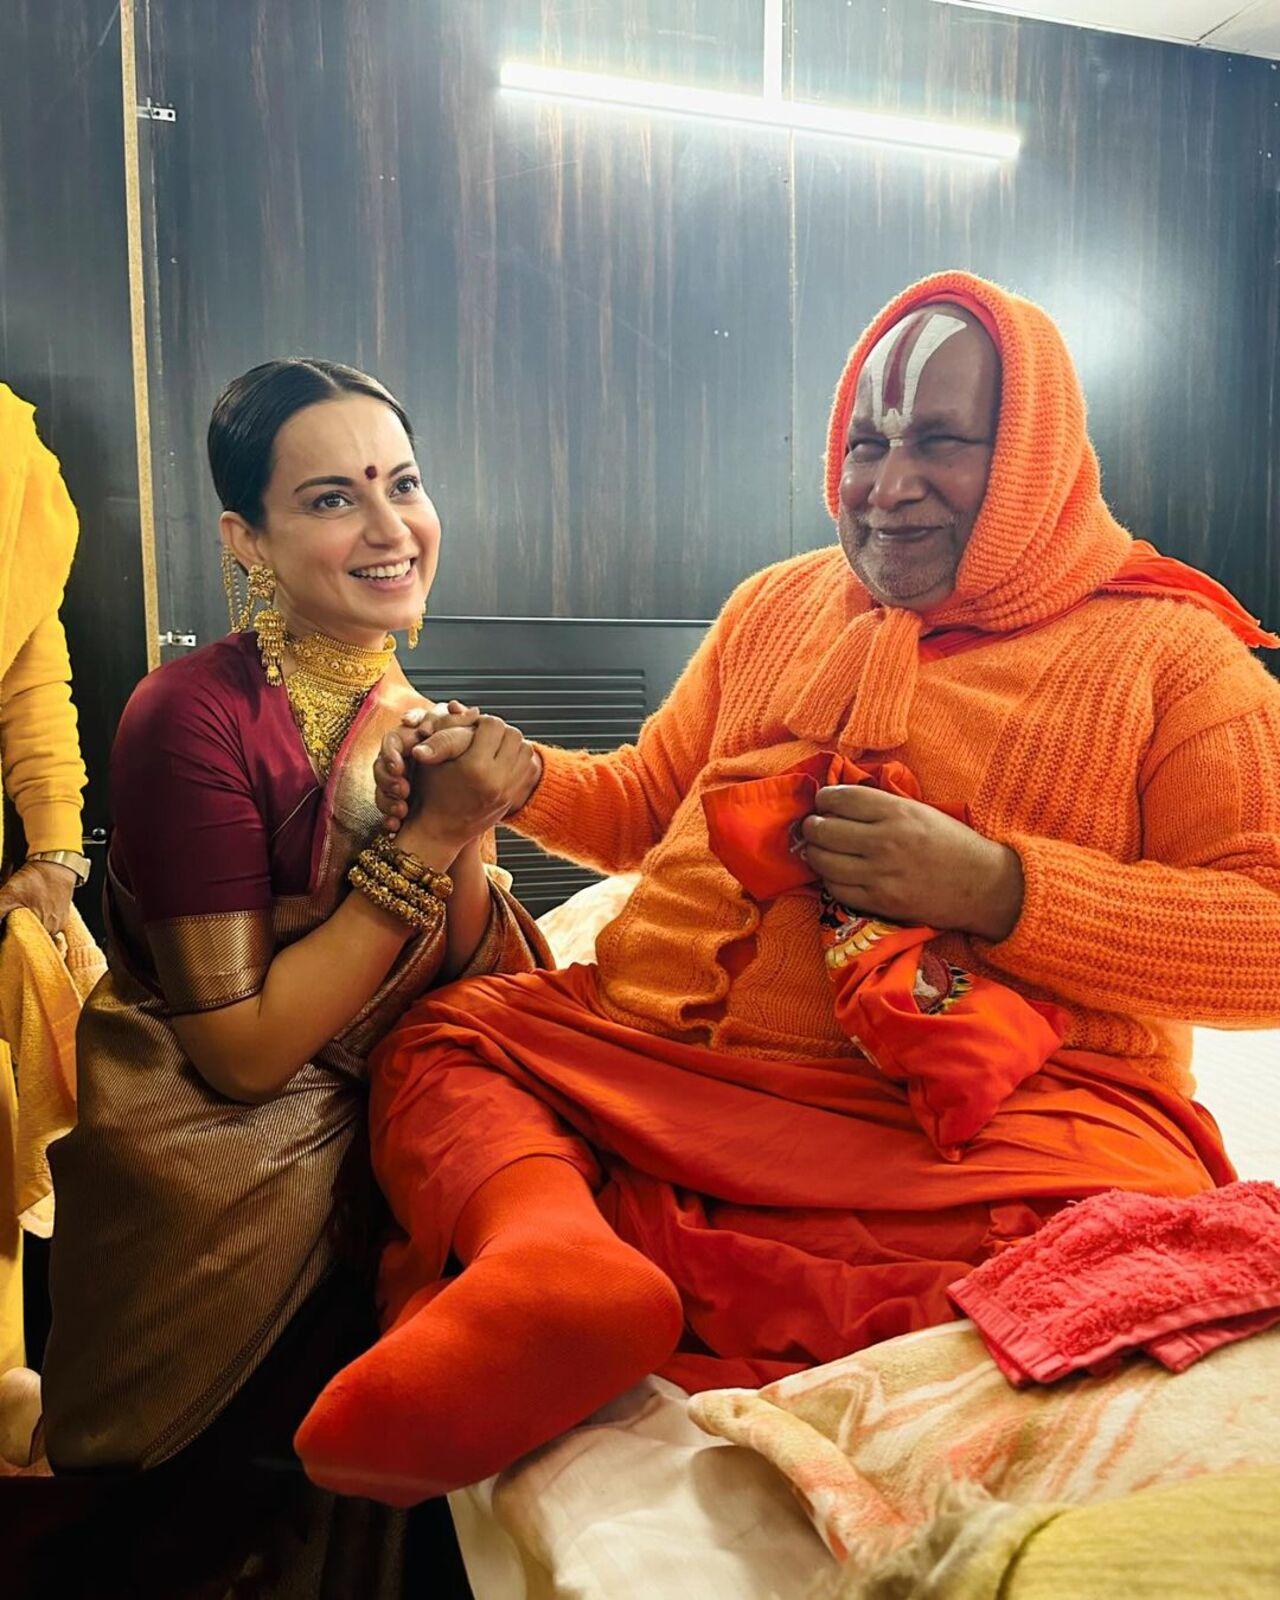 Kangana also shared pictures of her having a light moment with saint Rambhadracharya as she takes his blessings